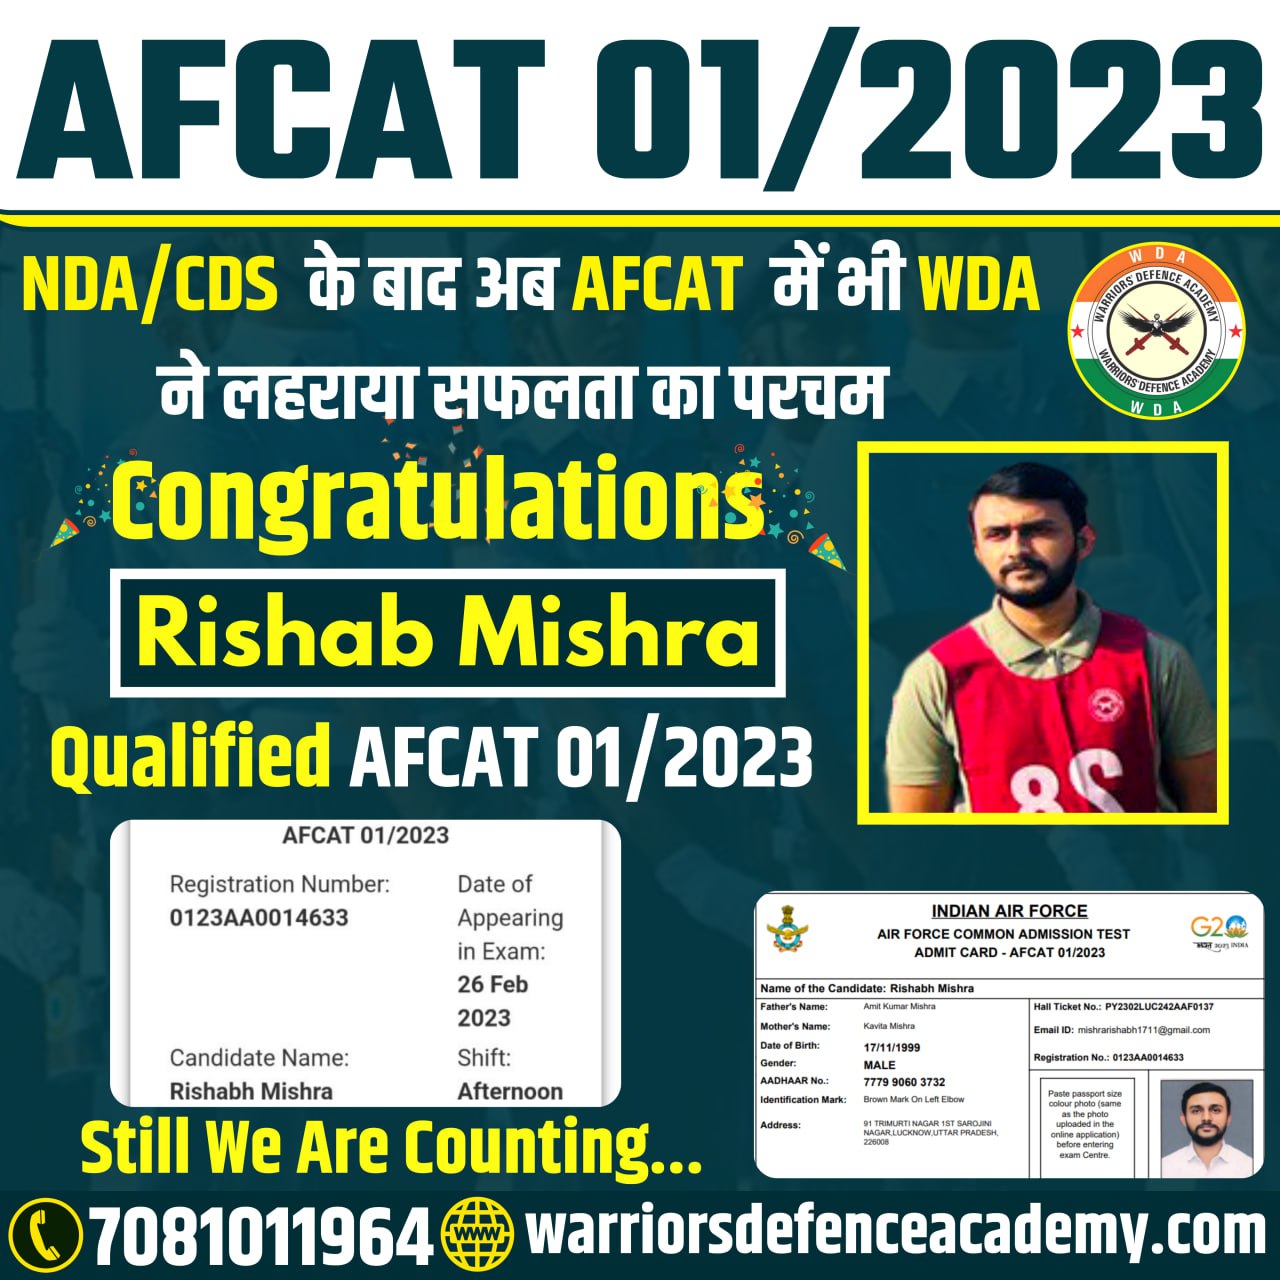 Best NDA Coaching in Lucknow | Best Defence Academy in Lucknow, India | Warriors Defence Academy Best NDA Coaching in Lucknow